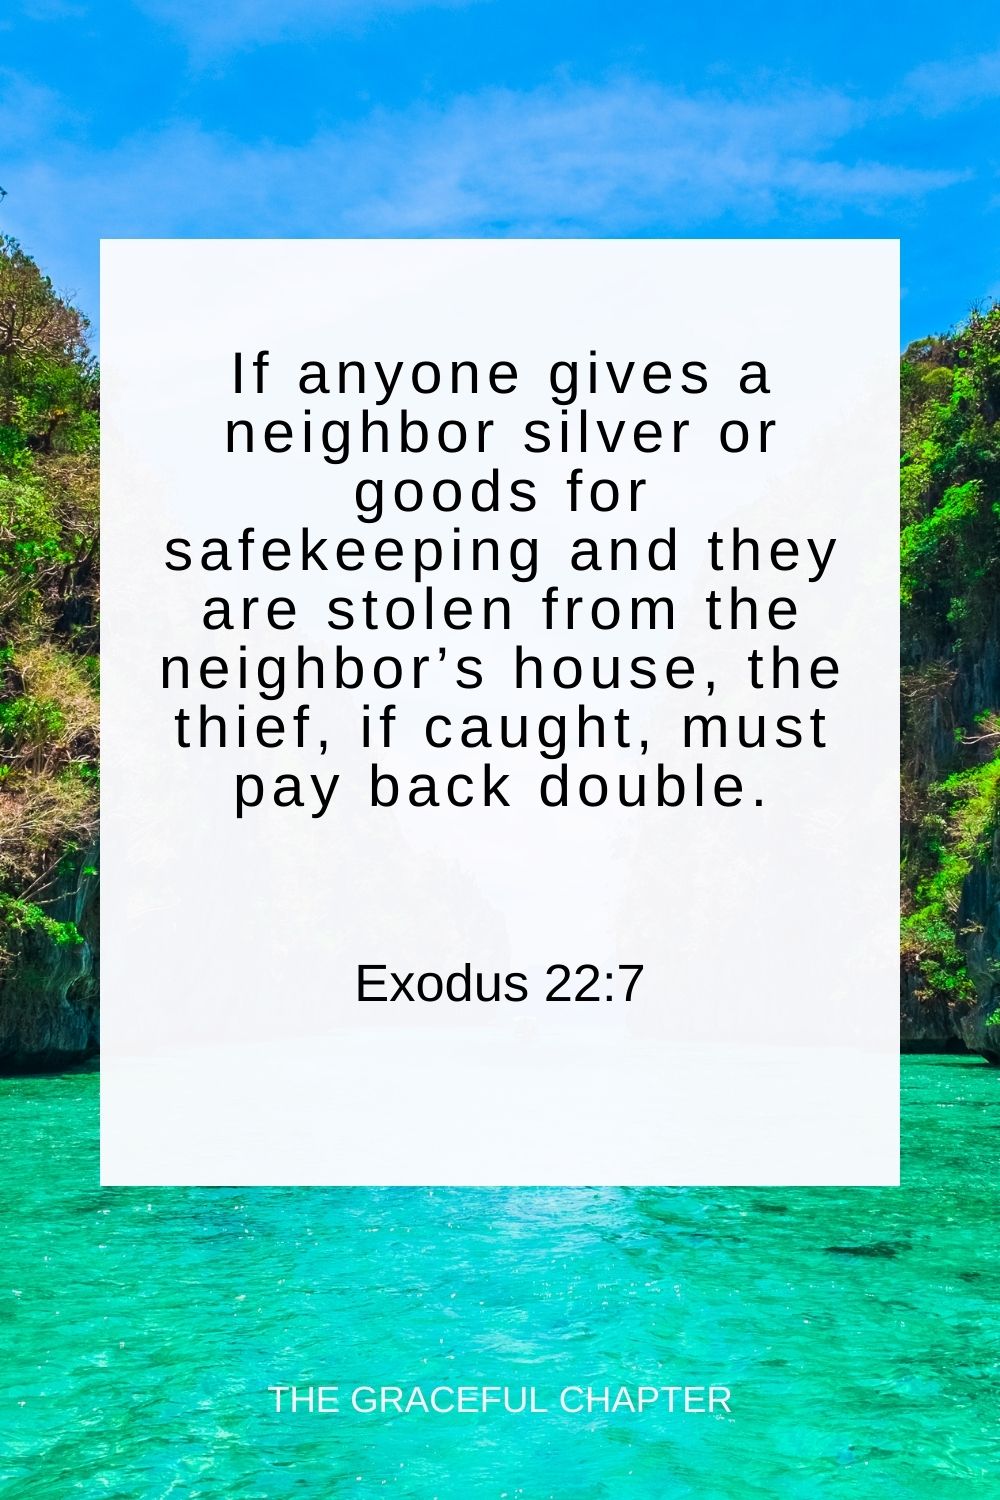 If anyone gives a neighbor silver or goods for safekeeping and they are stolen from the neighbor’s house, the thief, if caught, must pay back double. Exodus 22:7